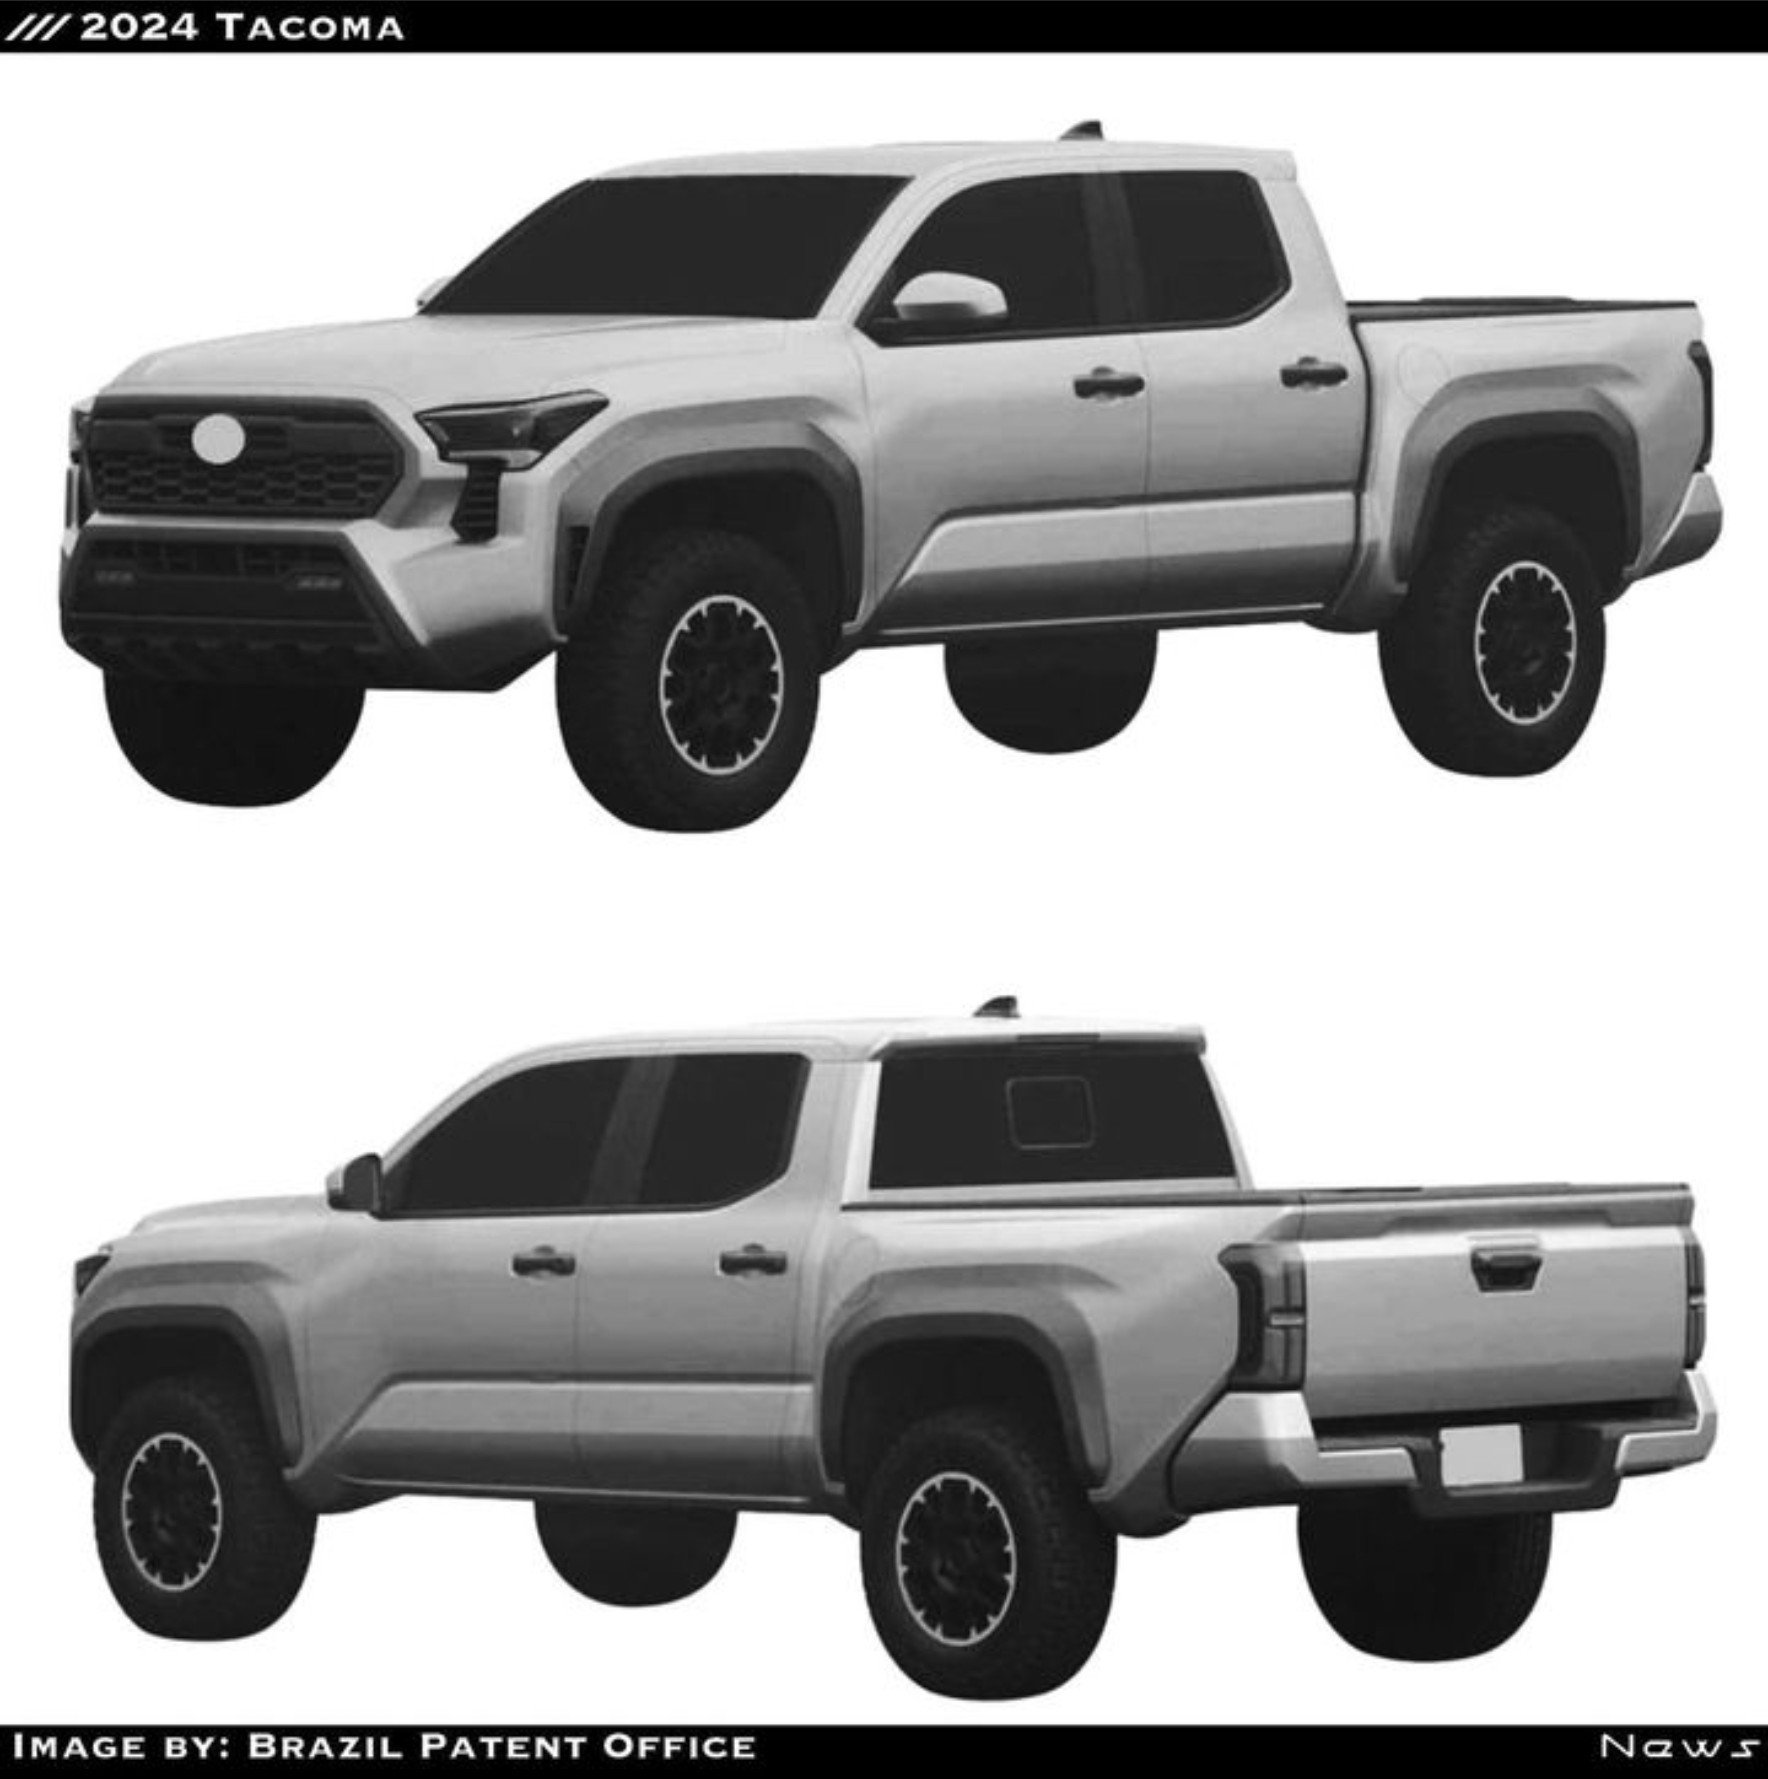 2024 Tacoma New teaser 04/18:  Rear disk brakes and FOX suspension on 2024 Tacoma screenshot_20230124_183731_instagram_86d79f8c13df5f5fb576b0389b45813a6aac7f41